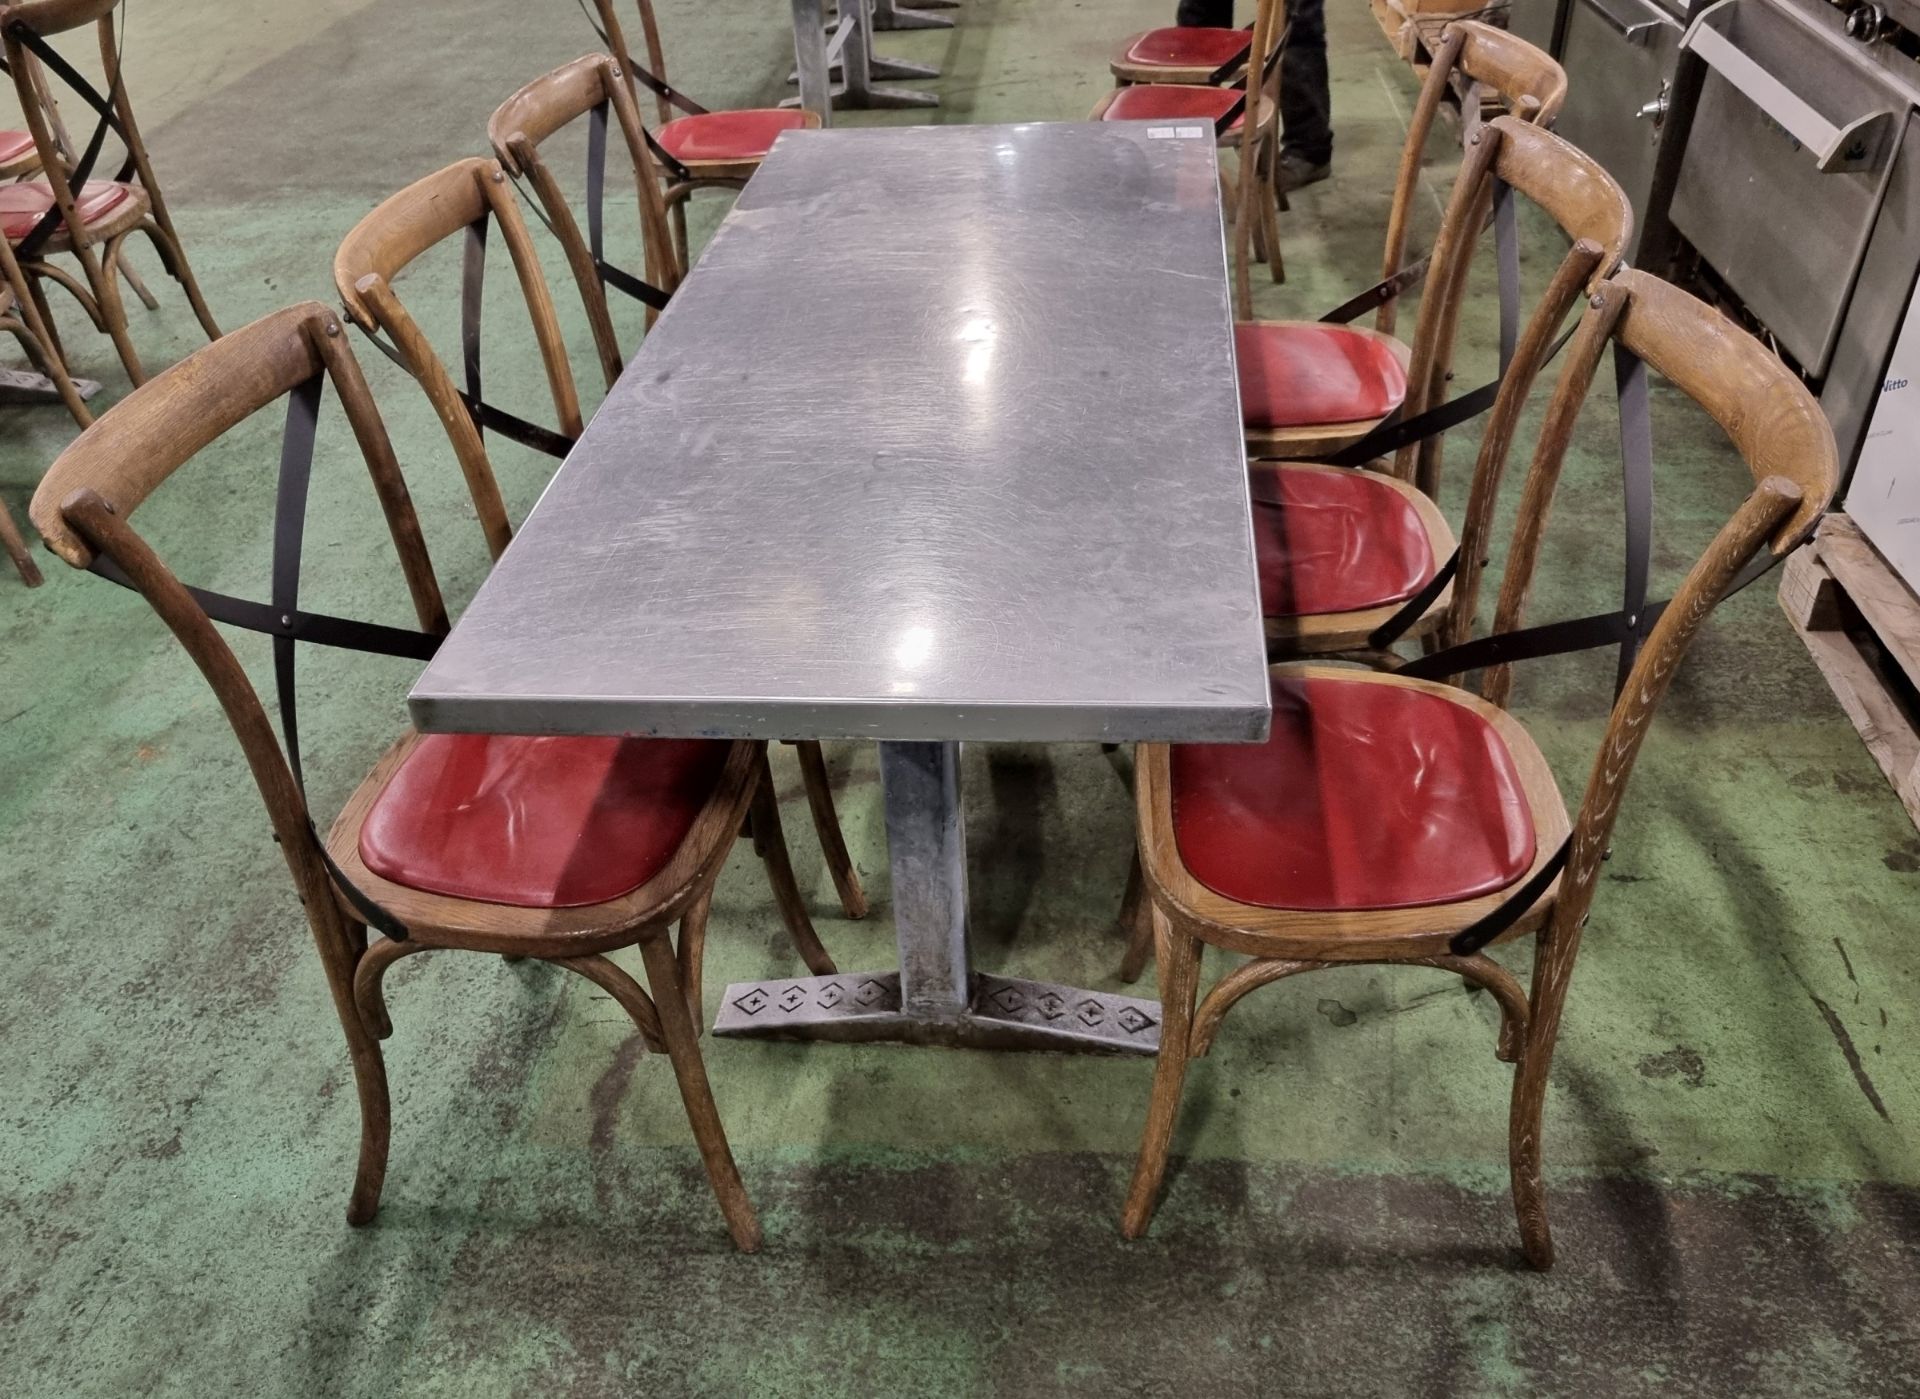 6x Wooden restaurant chairs, Metal table - W 1610 x D 690 x H 760 mm - Image 4 of 5